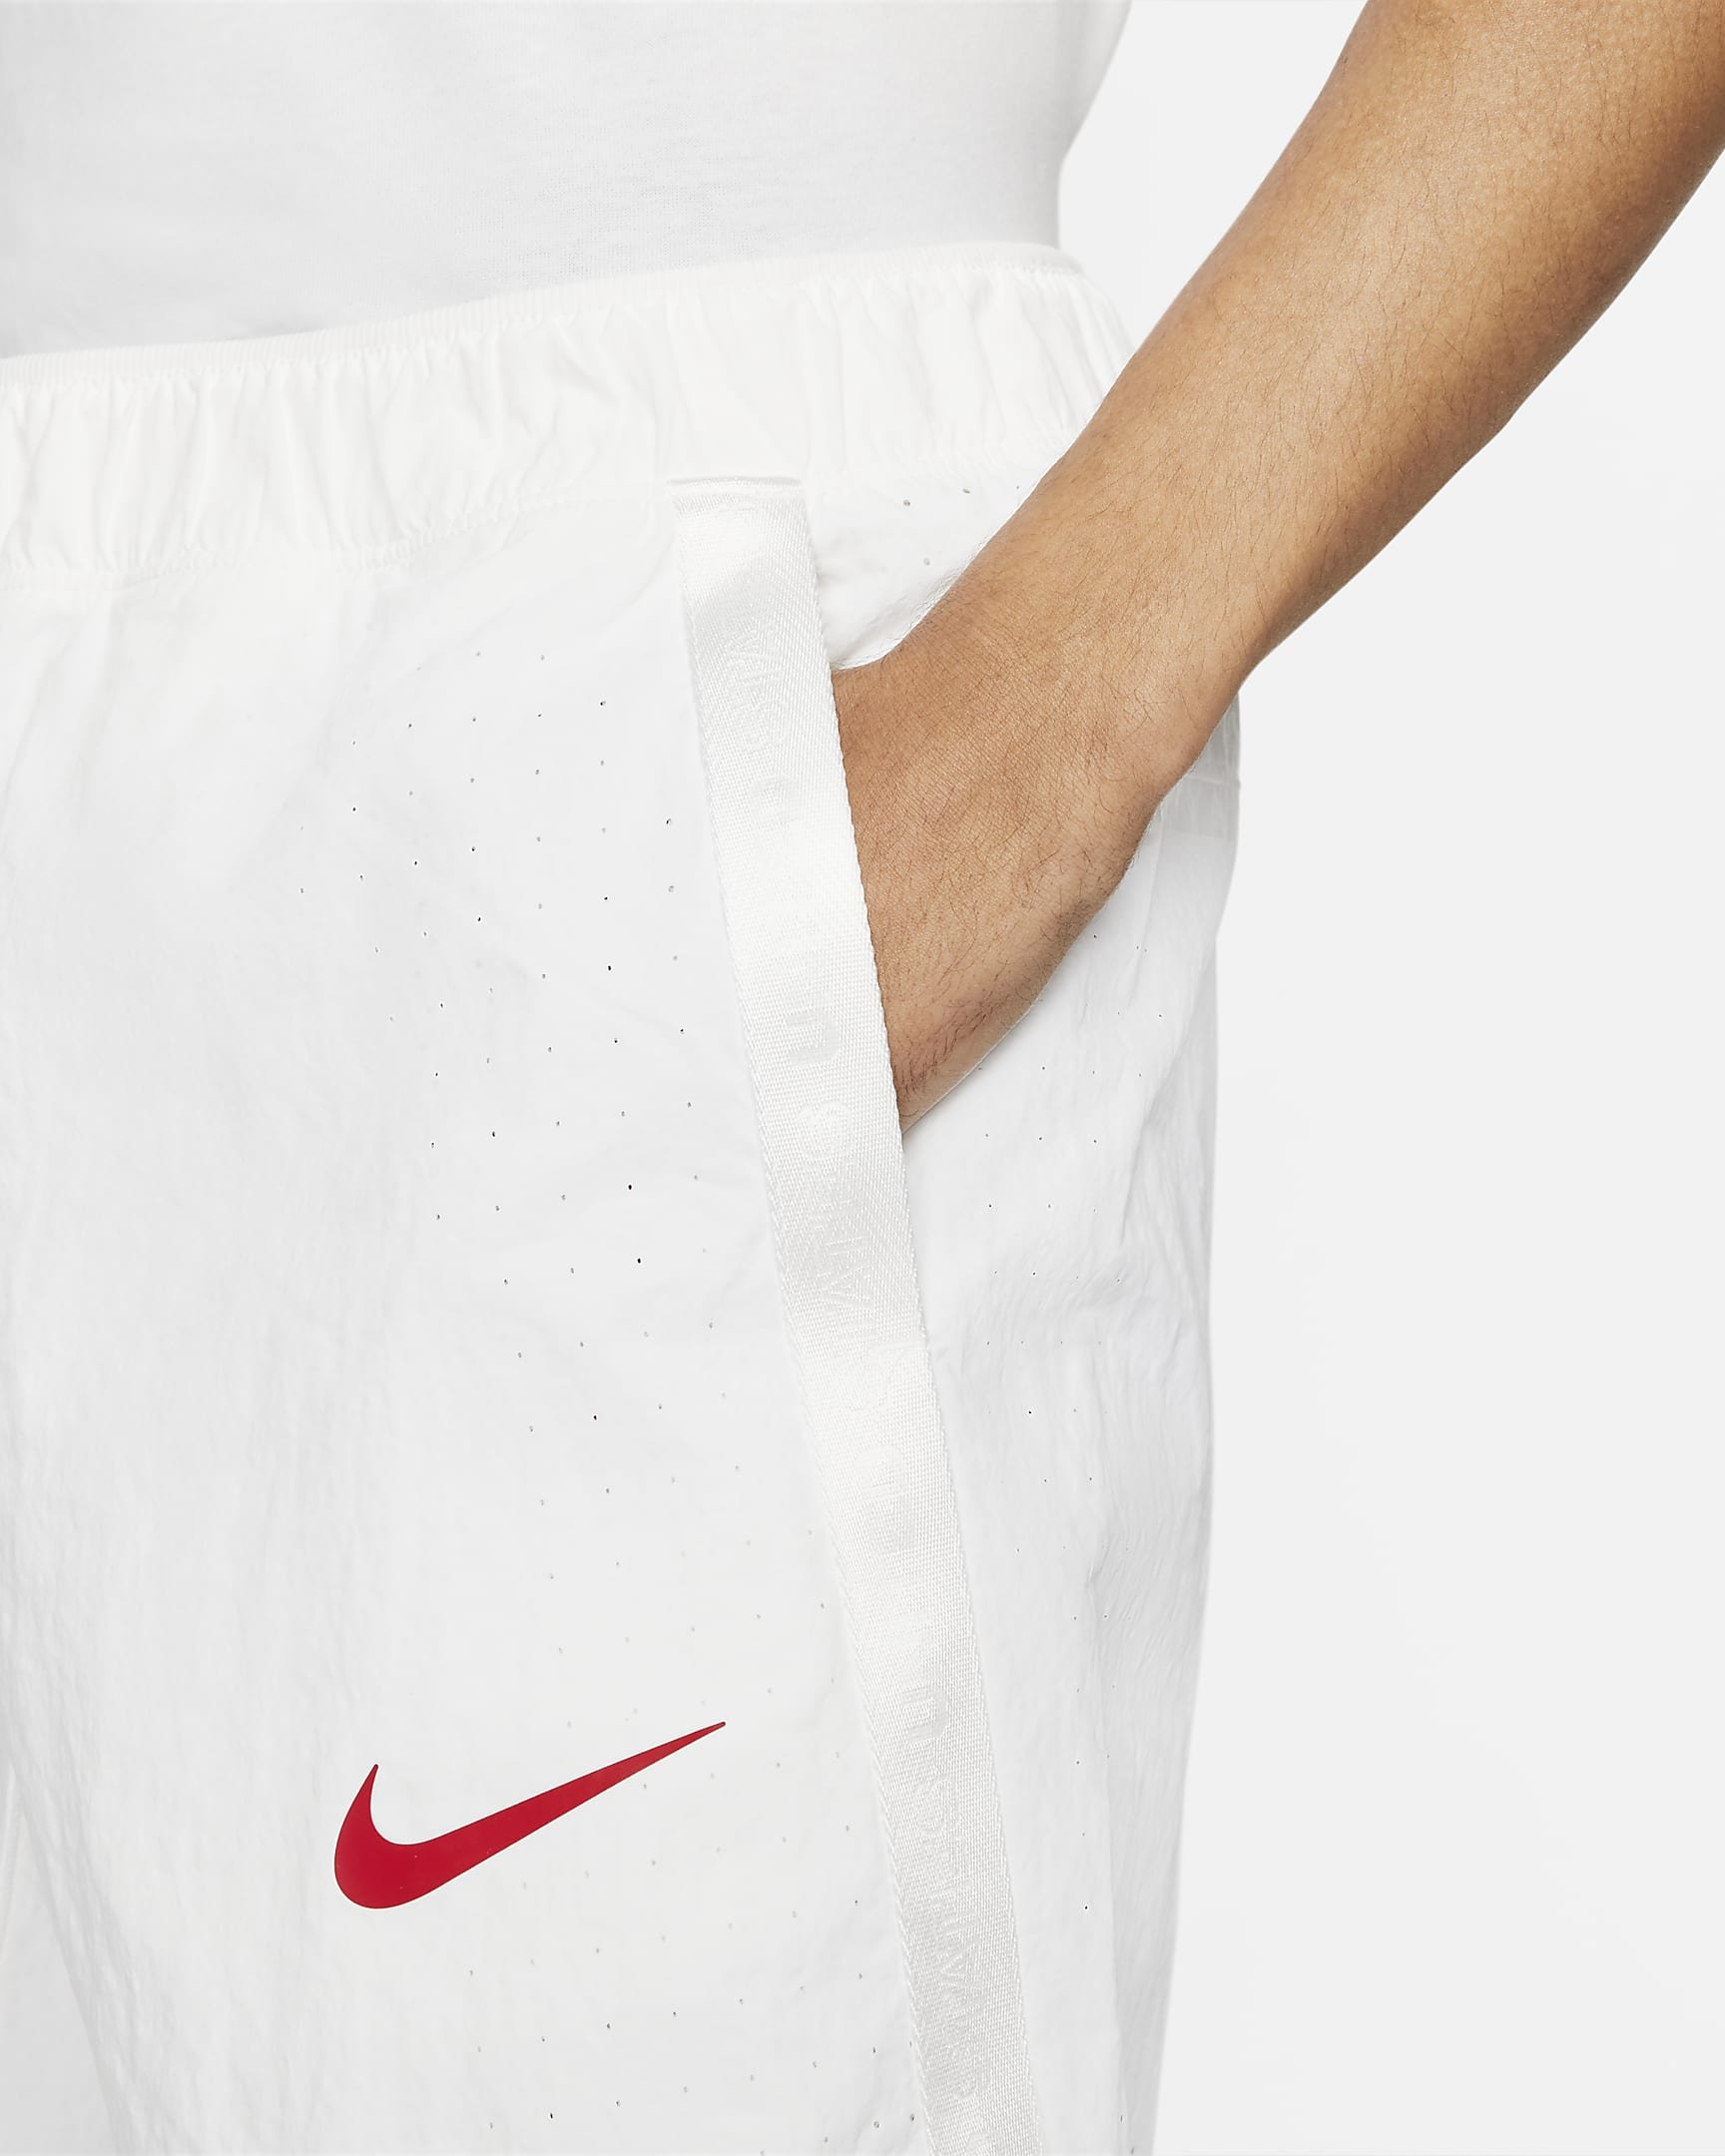 Over 50% OFF the Nike Team USA Medal Stand Pants — Sneaker Shouts